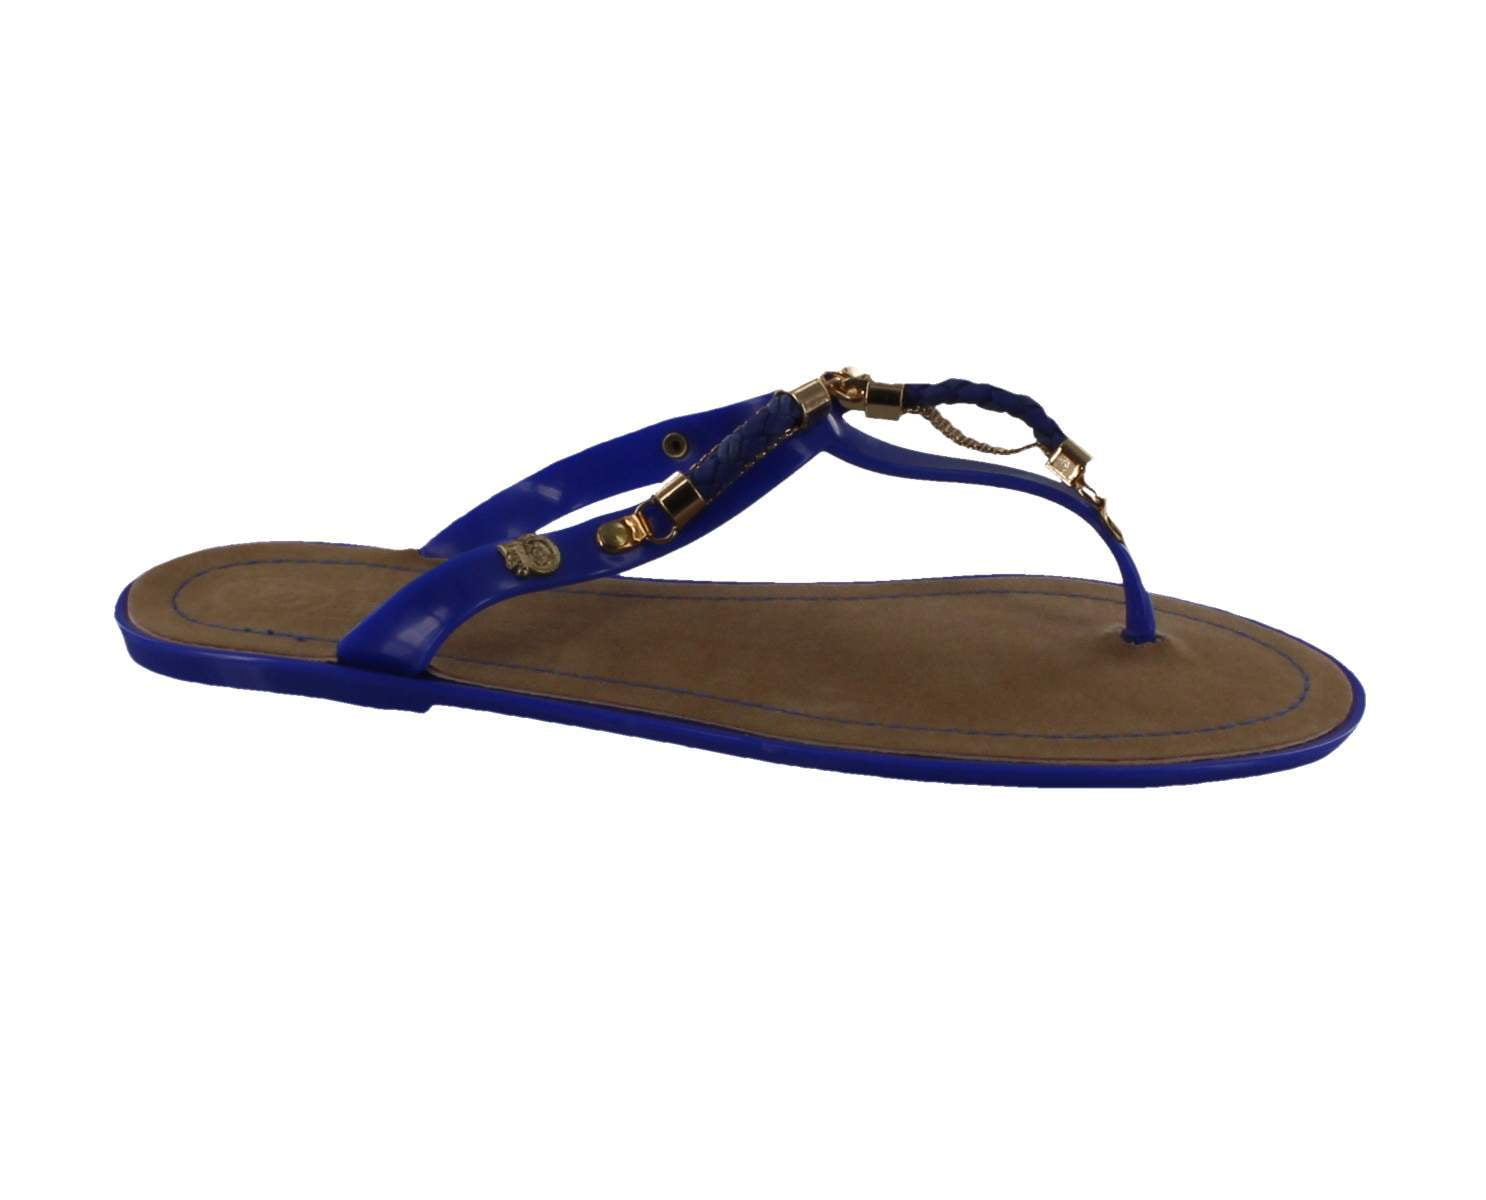 Jelly Footwear Sandal Jandal Style Flat Blue with Braid Accent and Gold ...